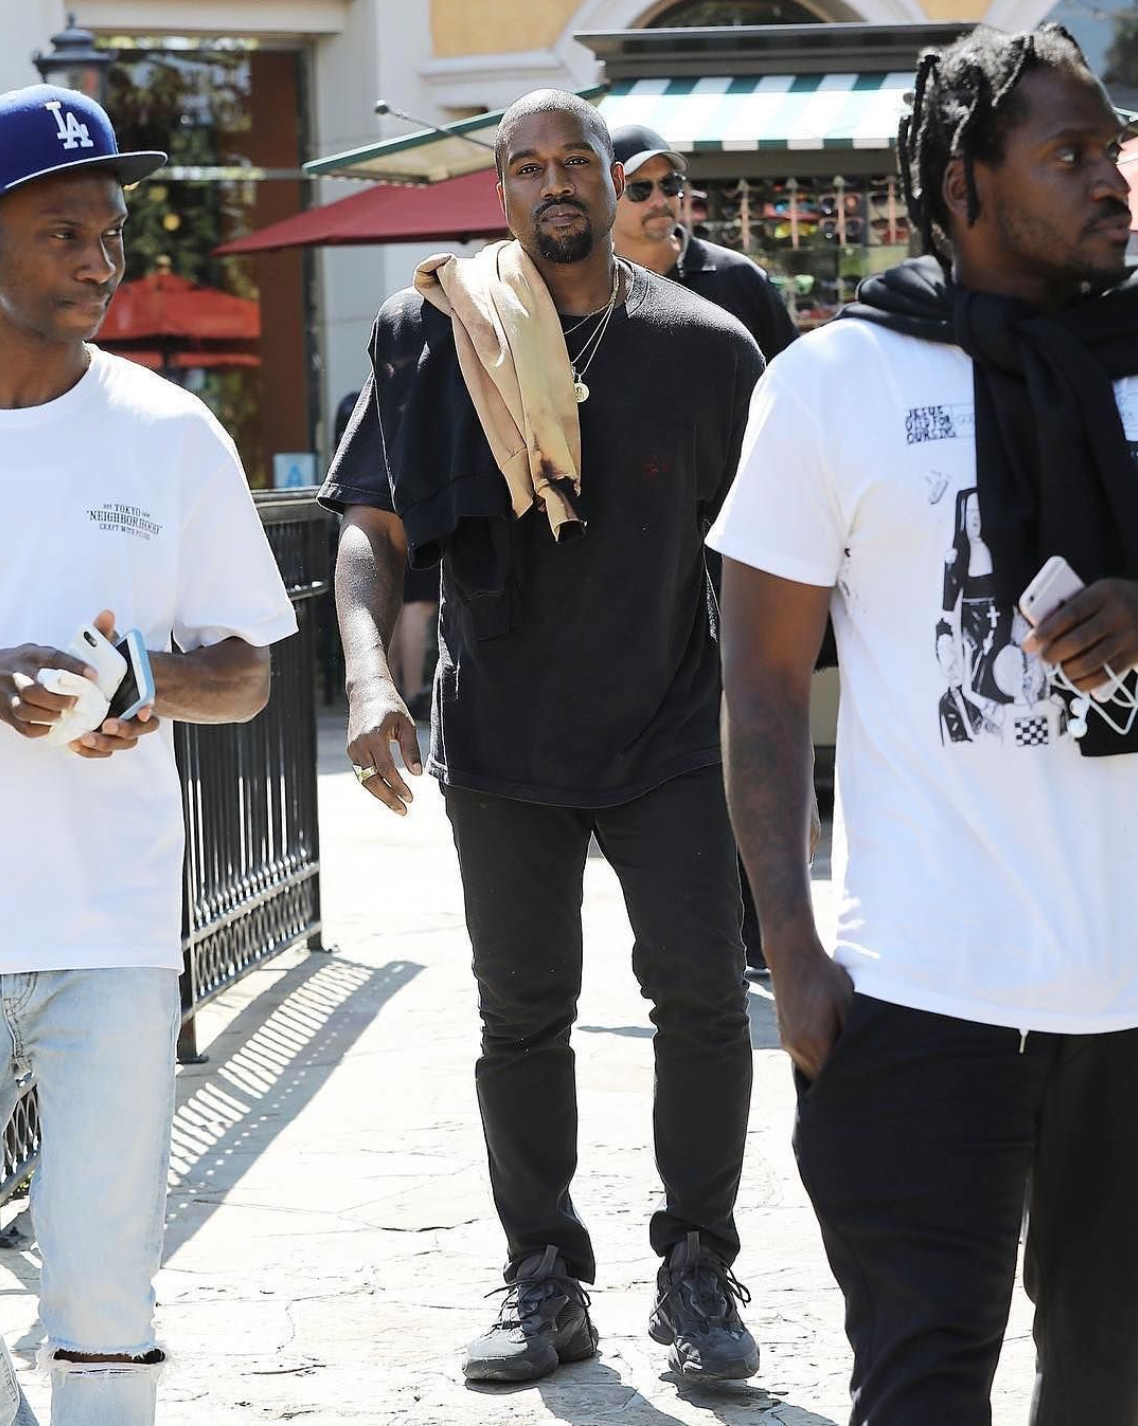 SPOTTED: Kanye West in Unreleased Yeezy Runners